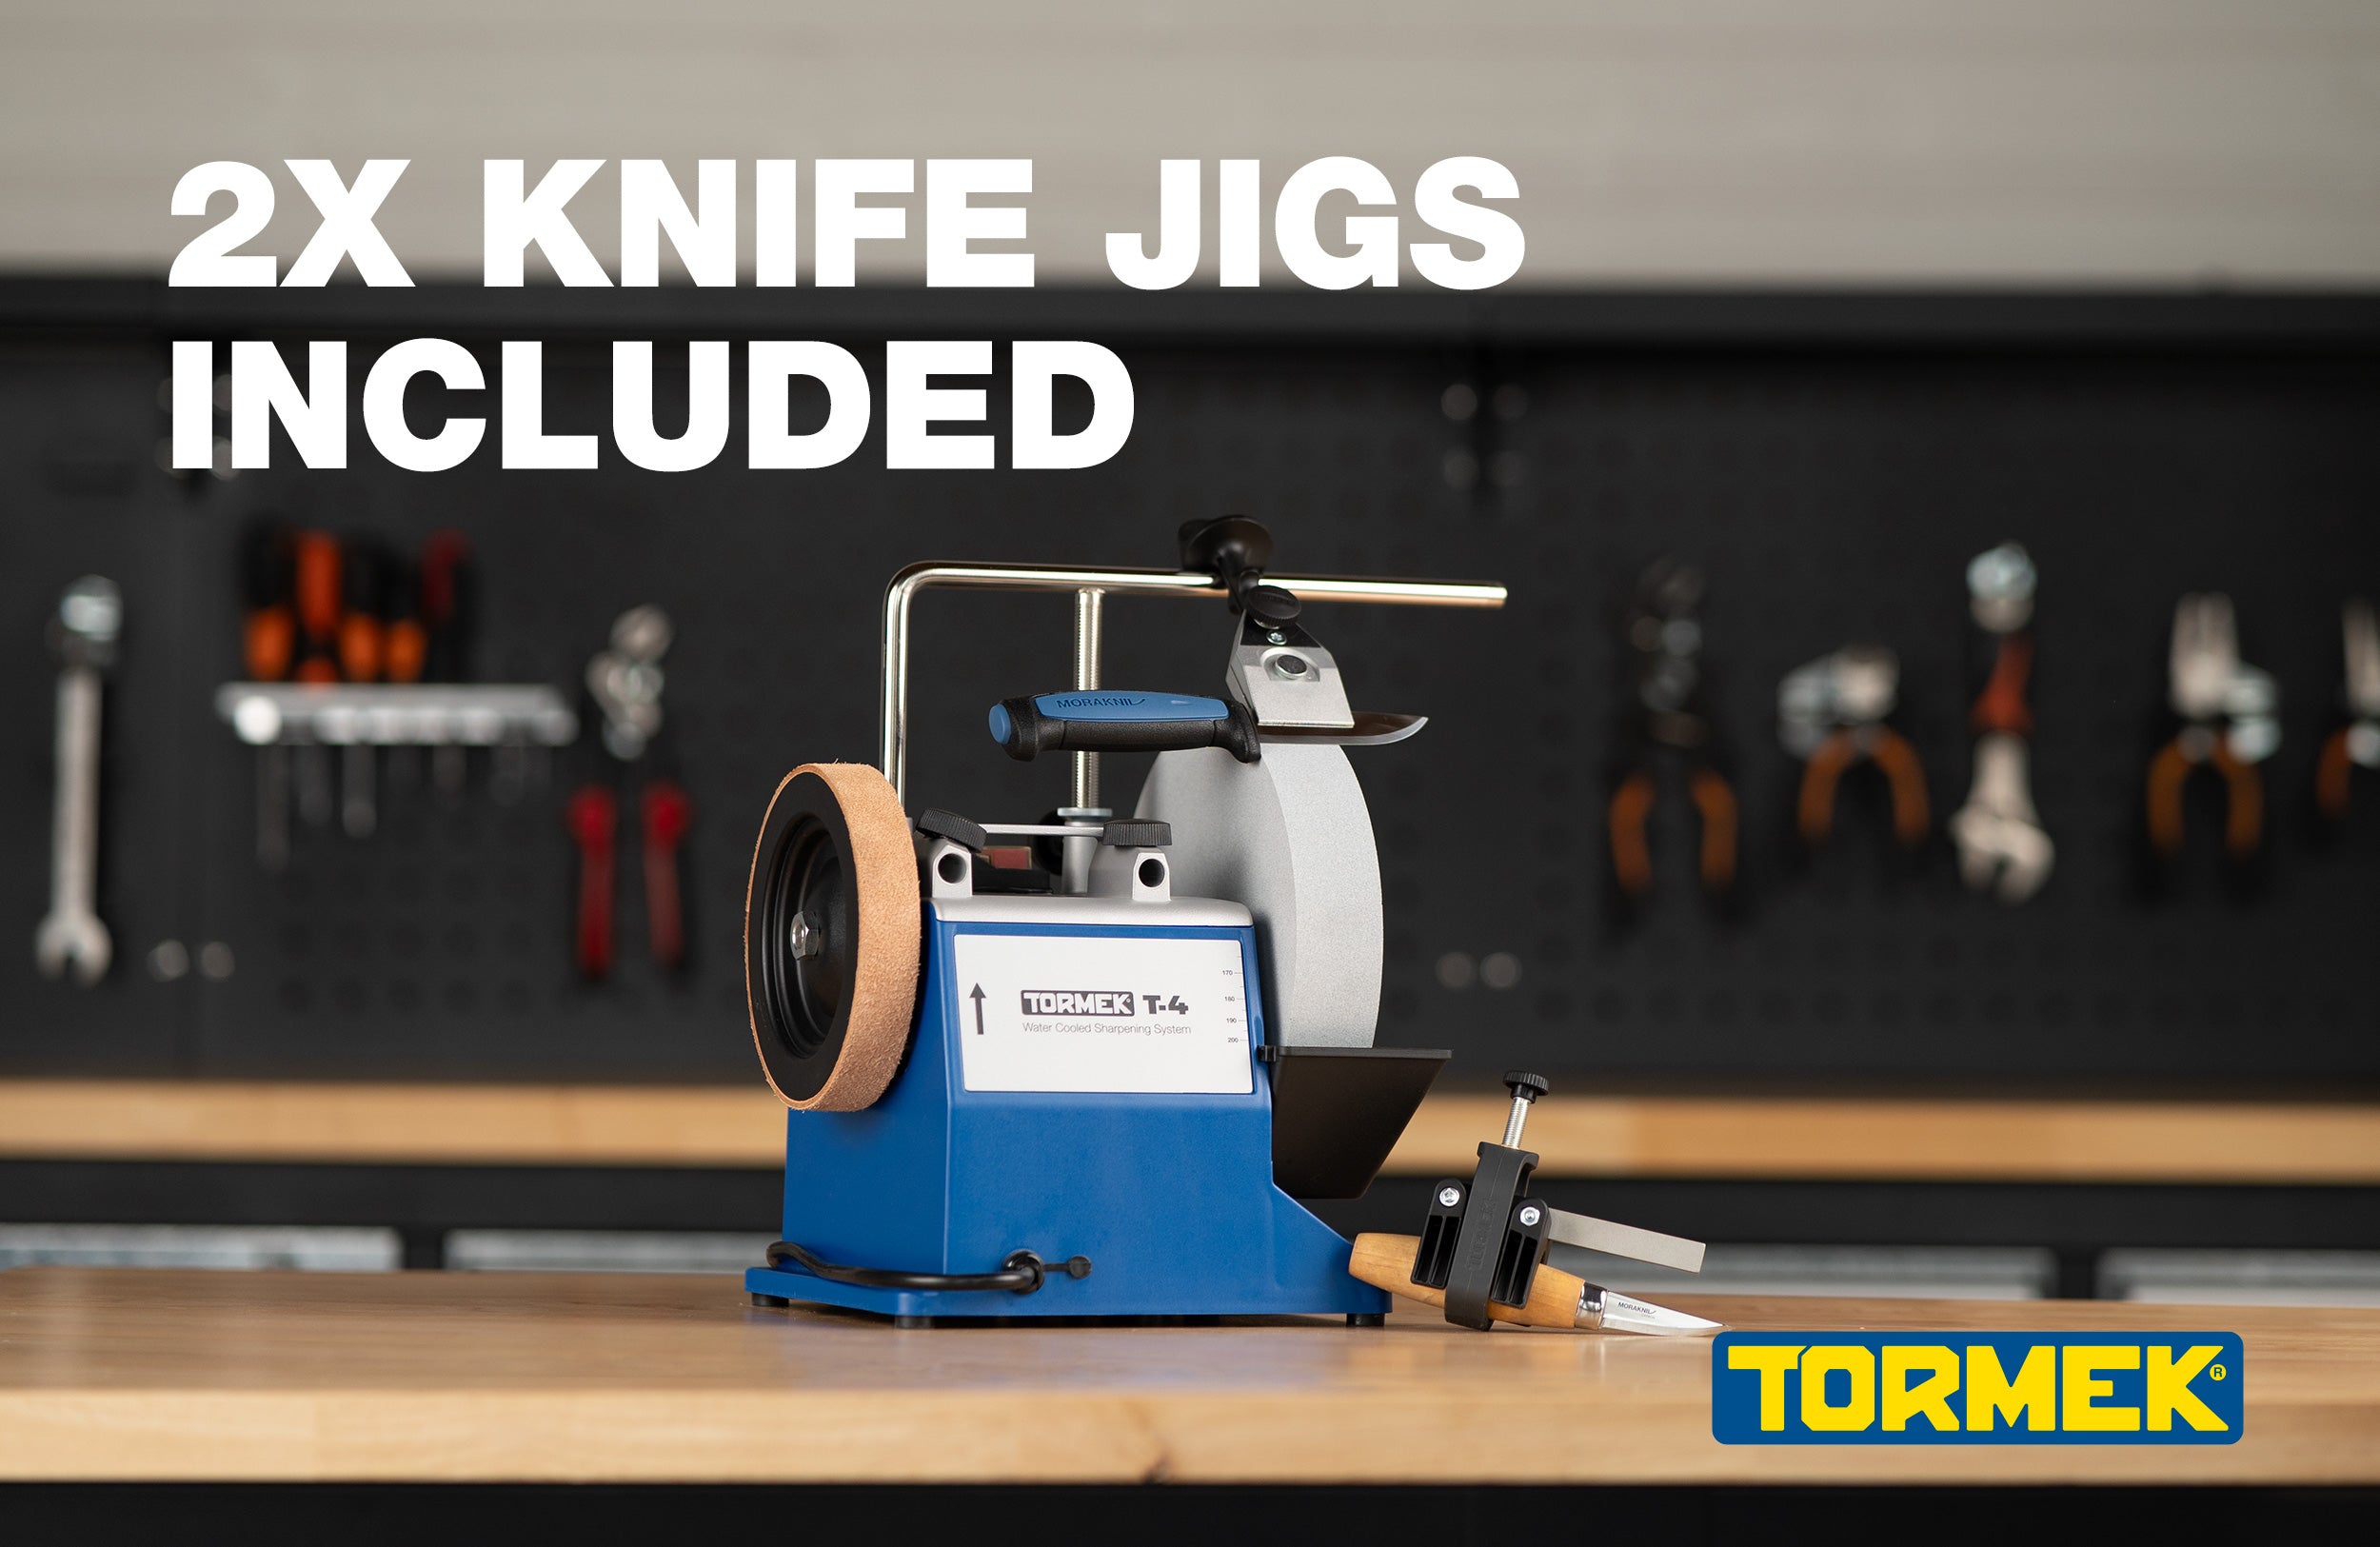 *Limited Edition* T-4 Original + KJ-45 + SVM-00 Water Cooled Tool Sharpening System by Tormek